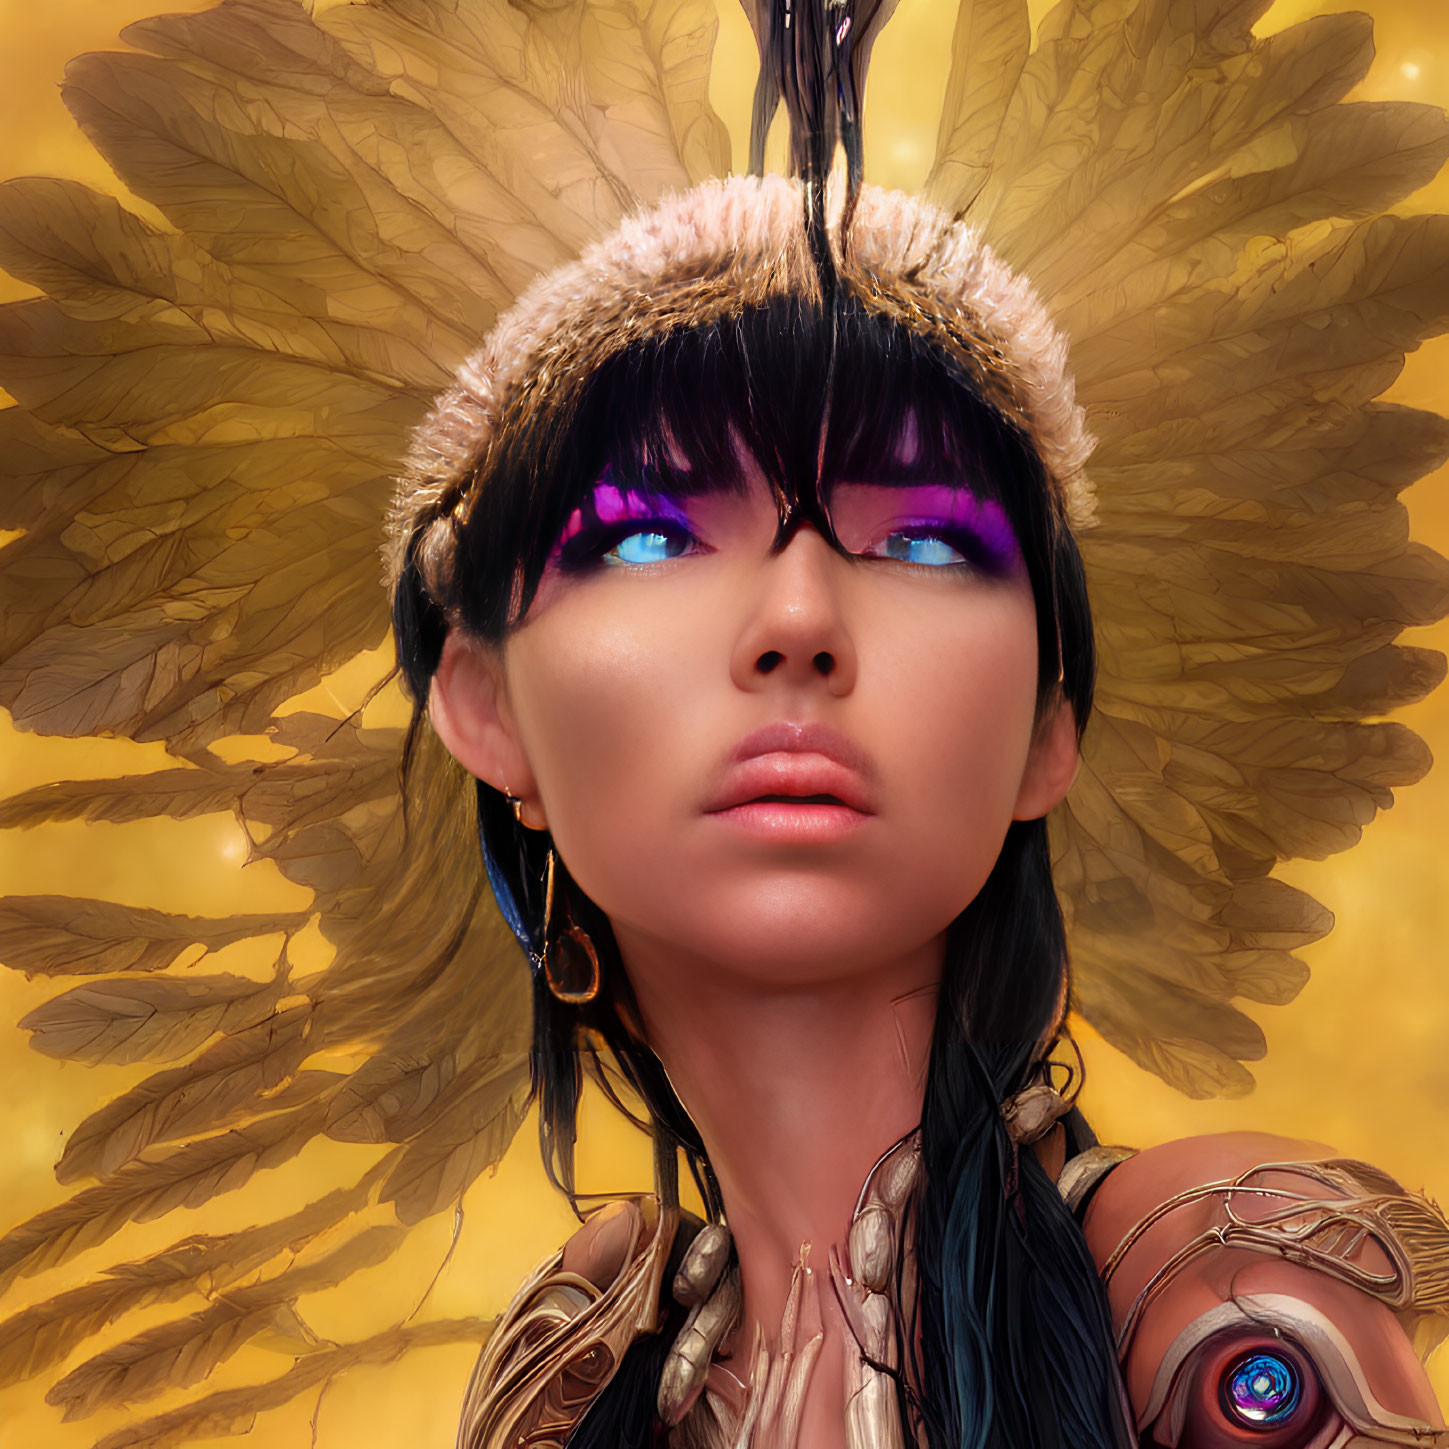 Woman with Purple Eyes and Ornate Golden Feathered Headdress in Futuristic Armor against Golden Background